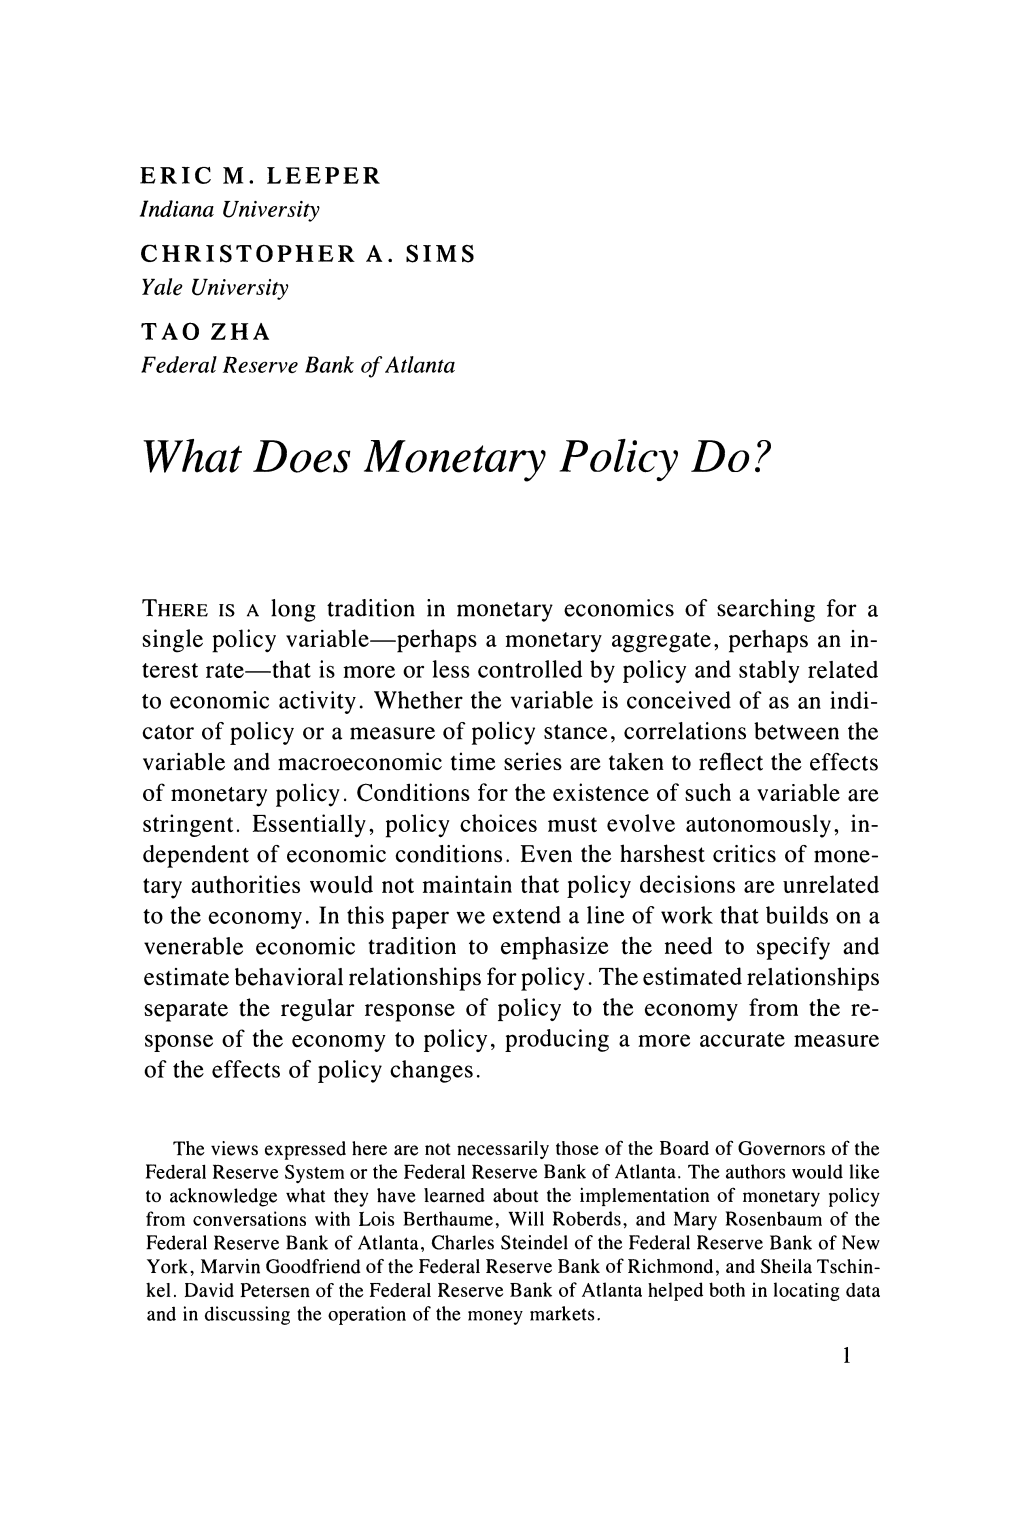 What Does Monetary Policy